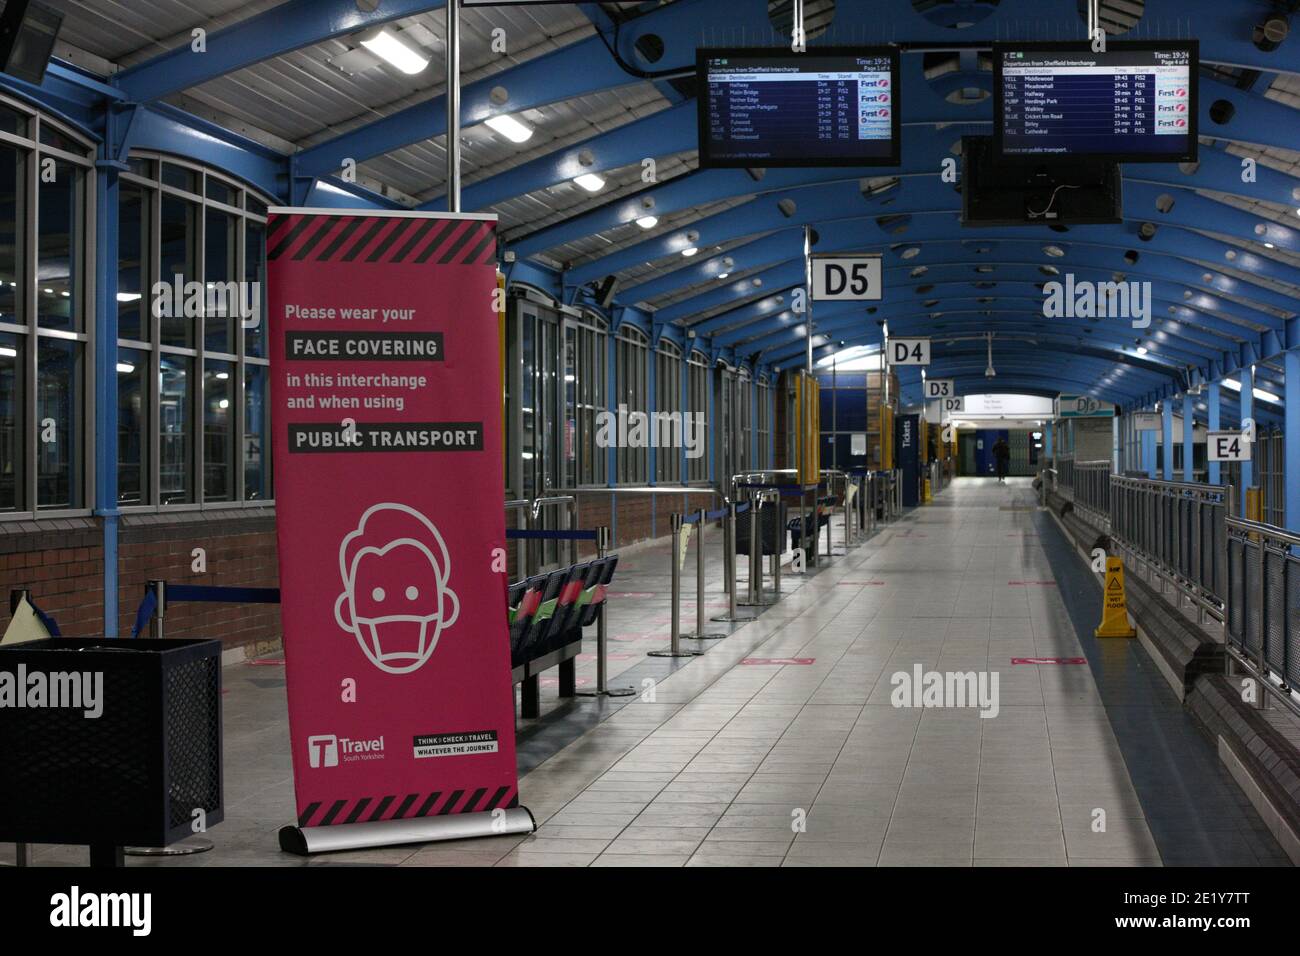 Sheffield, UK - October 5 2020: Signs reminding people to wear a face covering in Sheffield Interchange bus terminal. Sheffield is not currently in local lockdown but is thought to be on the brink since Covid cases more than doubled after missing tests figures were added. Stock Photo